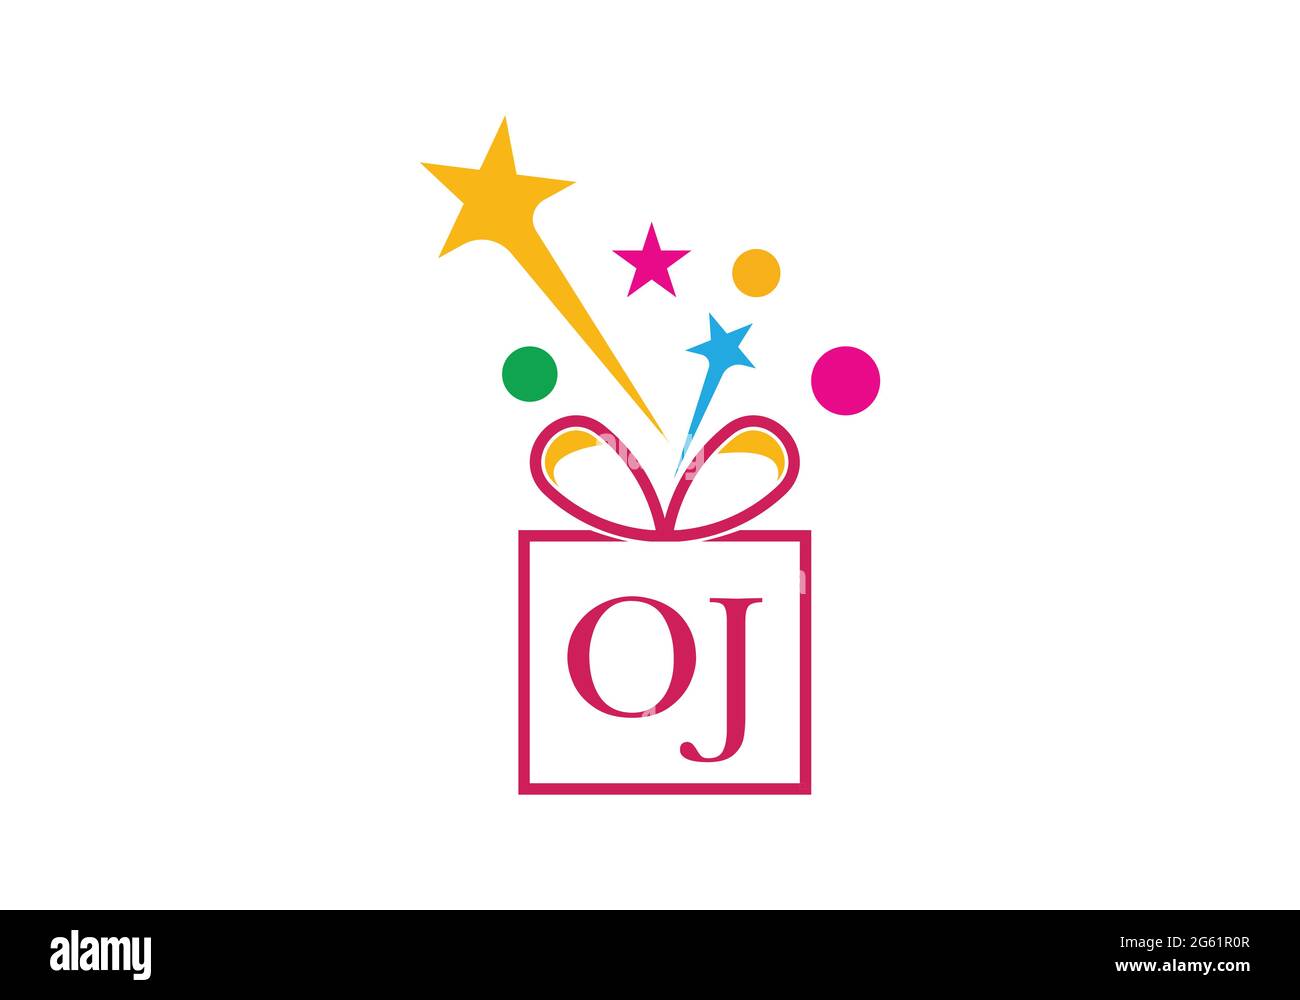 Gift Box, gift shop letter alphabet O J logo icon for Luxury brand design for wedding invitations, greeting card, logo, and other design. Stock Vector